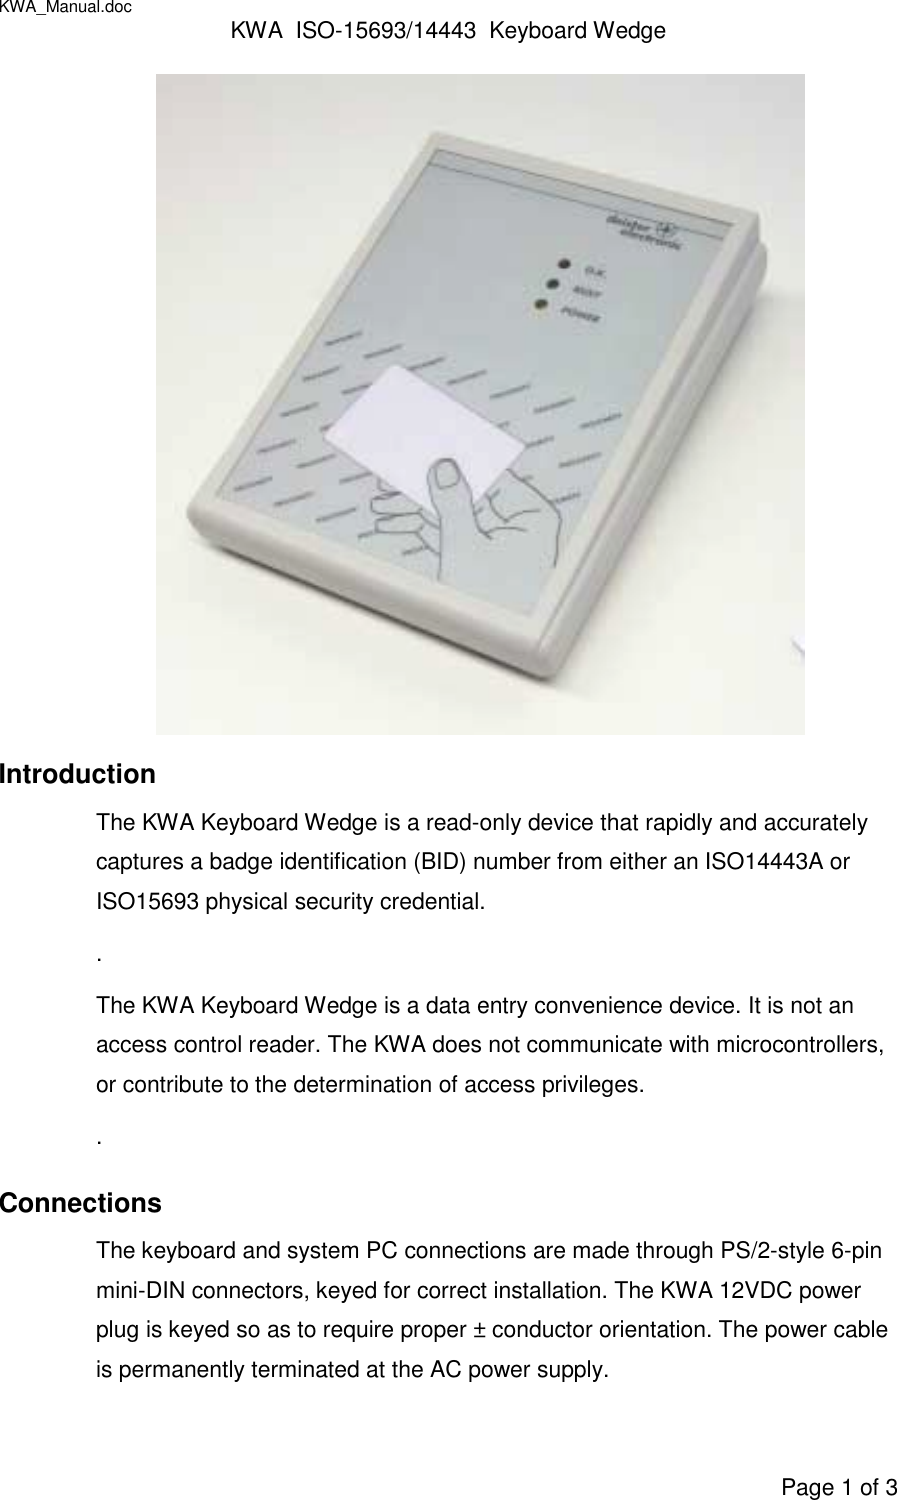 KWA_Manual.doc KWA  ISO-15693/14443  Keyboard WedgePage 1 of 3IntroductionThe KWA Keyboard Wedge is a read-only device that rapidly and accuratelycaptures a badge identification (BID) number from either an ISO14443A orISO15693 physical security credential..The KWA Keyboard Wedge is a data entry convenience device. It is not anaccess control reader. The KWA does not communicate with microcontrollers,or contribute to the determination of access privileges..ConnectionsThe keyboard and system PC connections are made through PS/2-style 6-pinmini-DIN connectors, keyed for correct installation. The KWA 12VDC powerplug is keyed so as to require proper ± conductor orientation. The power cableis permanently terminated at the AC power supply.